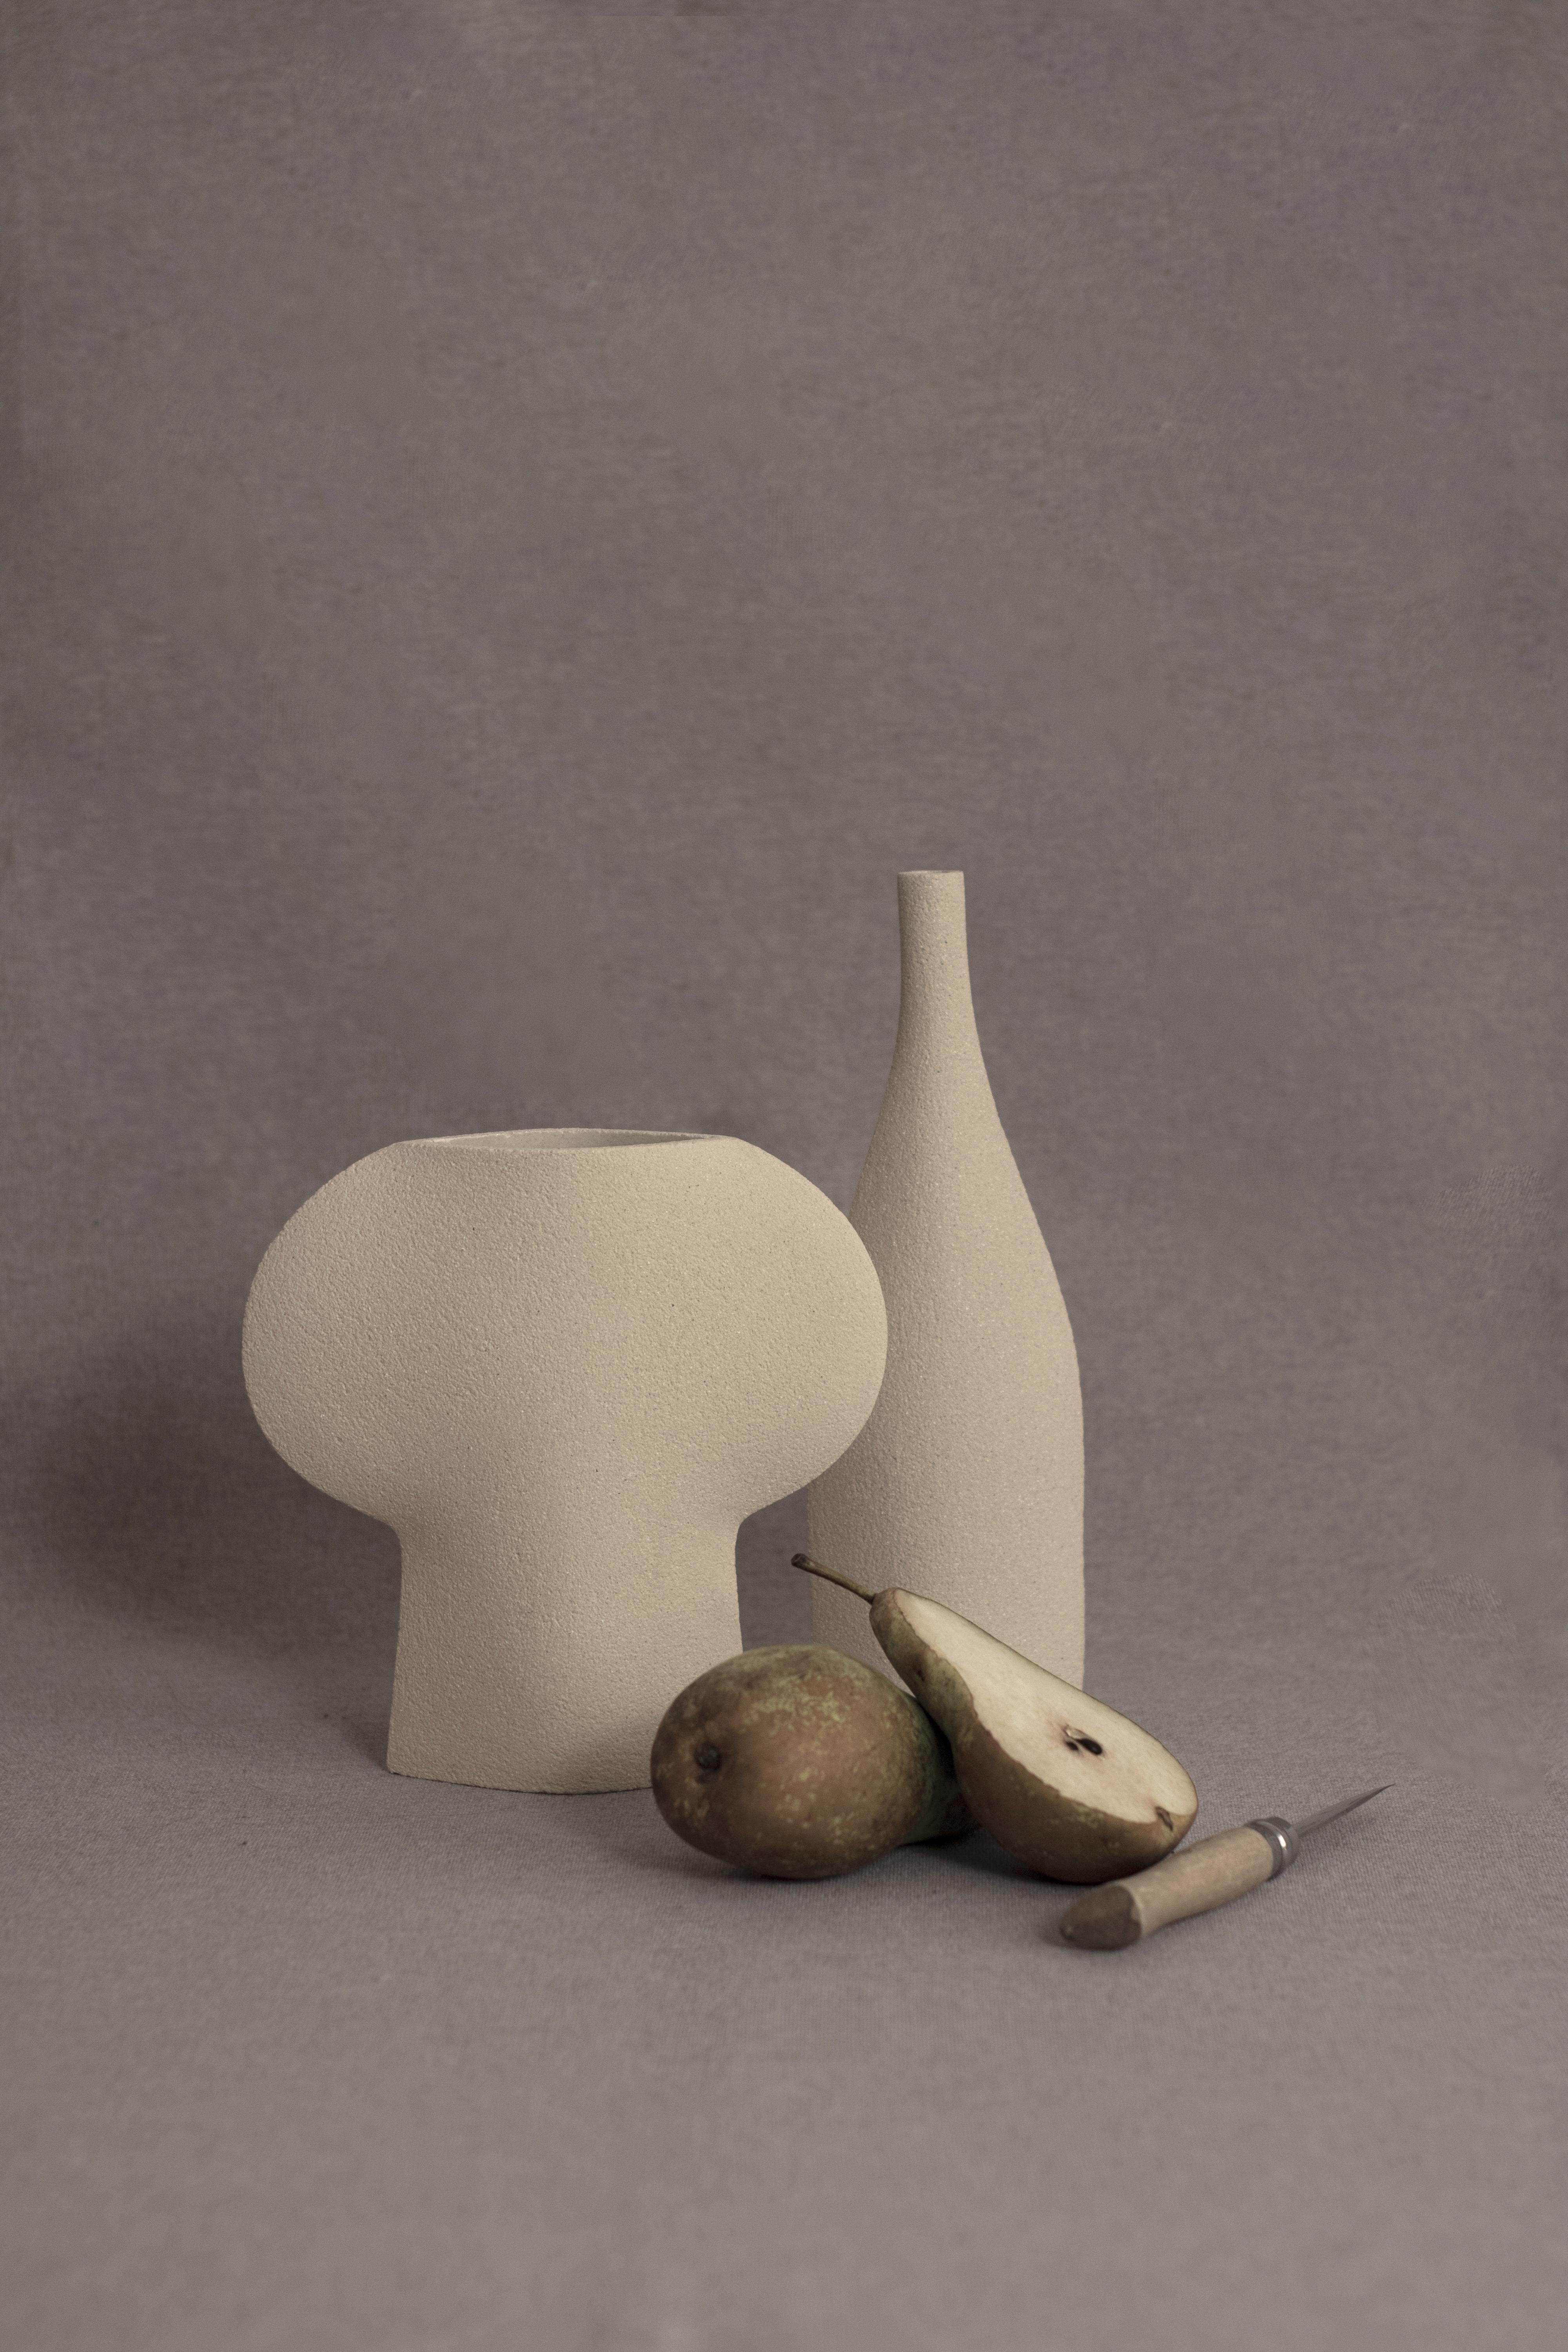 Contemporary 21st Century Clover Vase in White Ceramic, Hand-Crafted in France For Sale